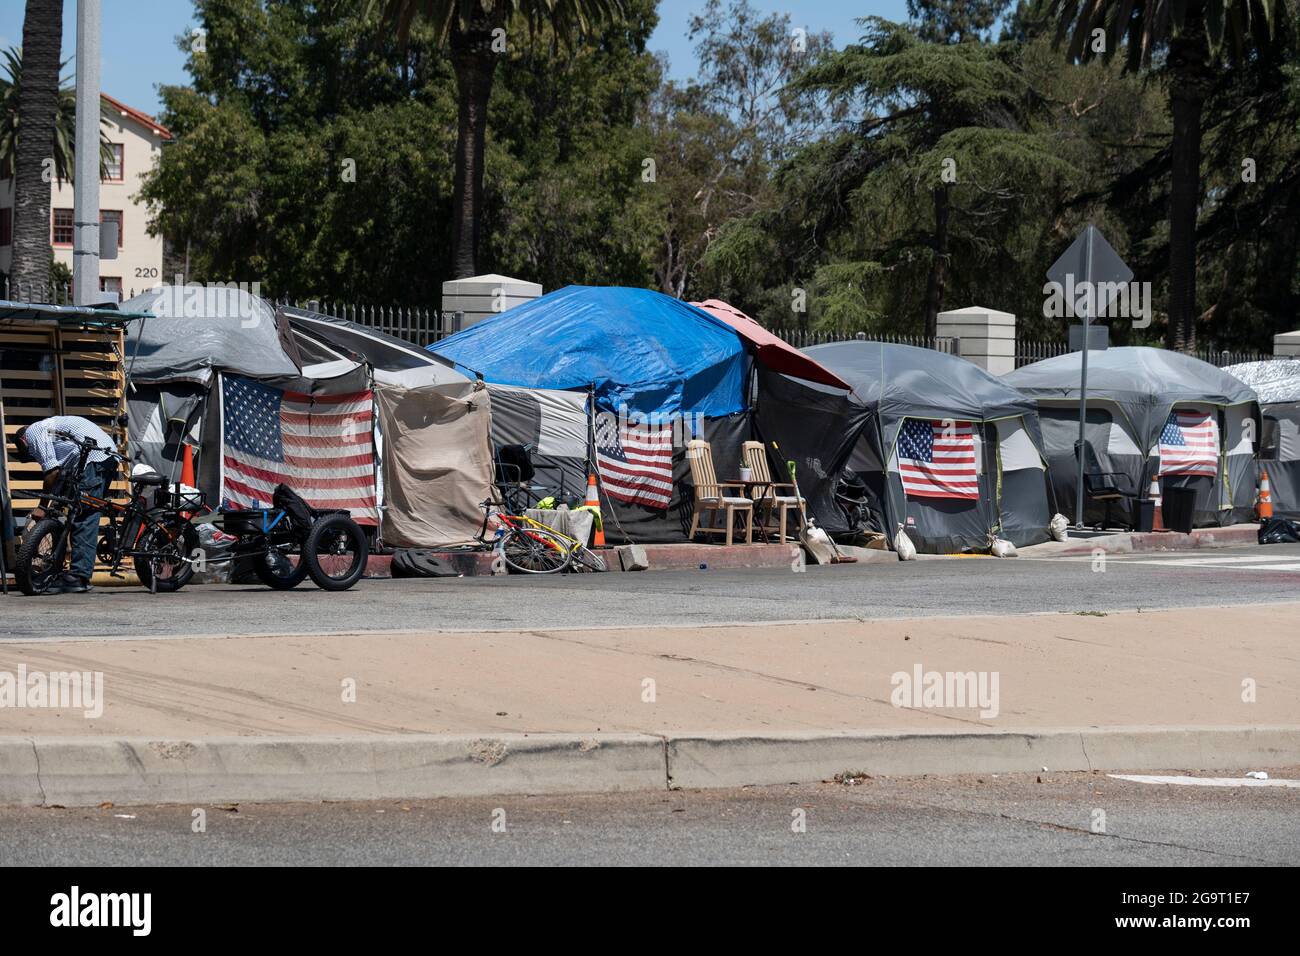 Los Angeles, CA USA - Julyl 3, 2021: Row of tents for homeless veterans surrounding the permieter of the Veterans Administration  and Hospital grounds Stock Photo